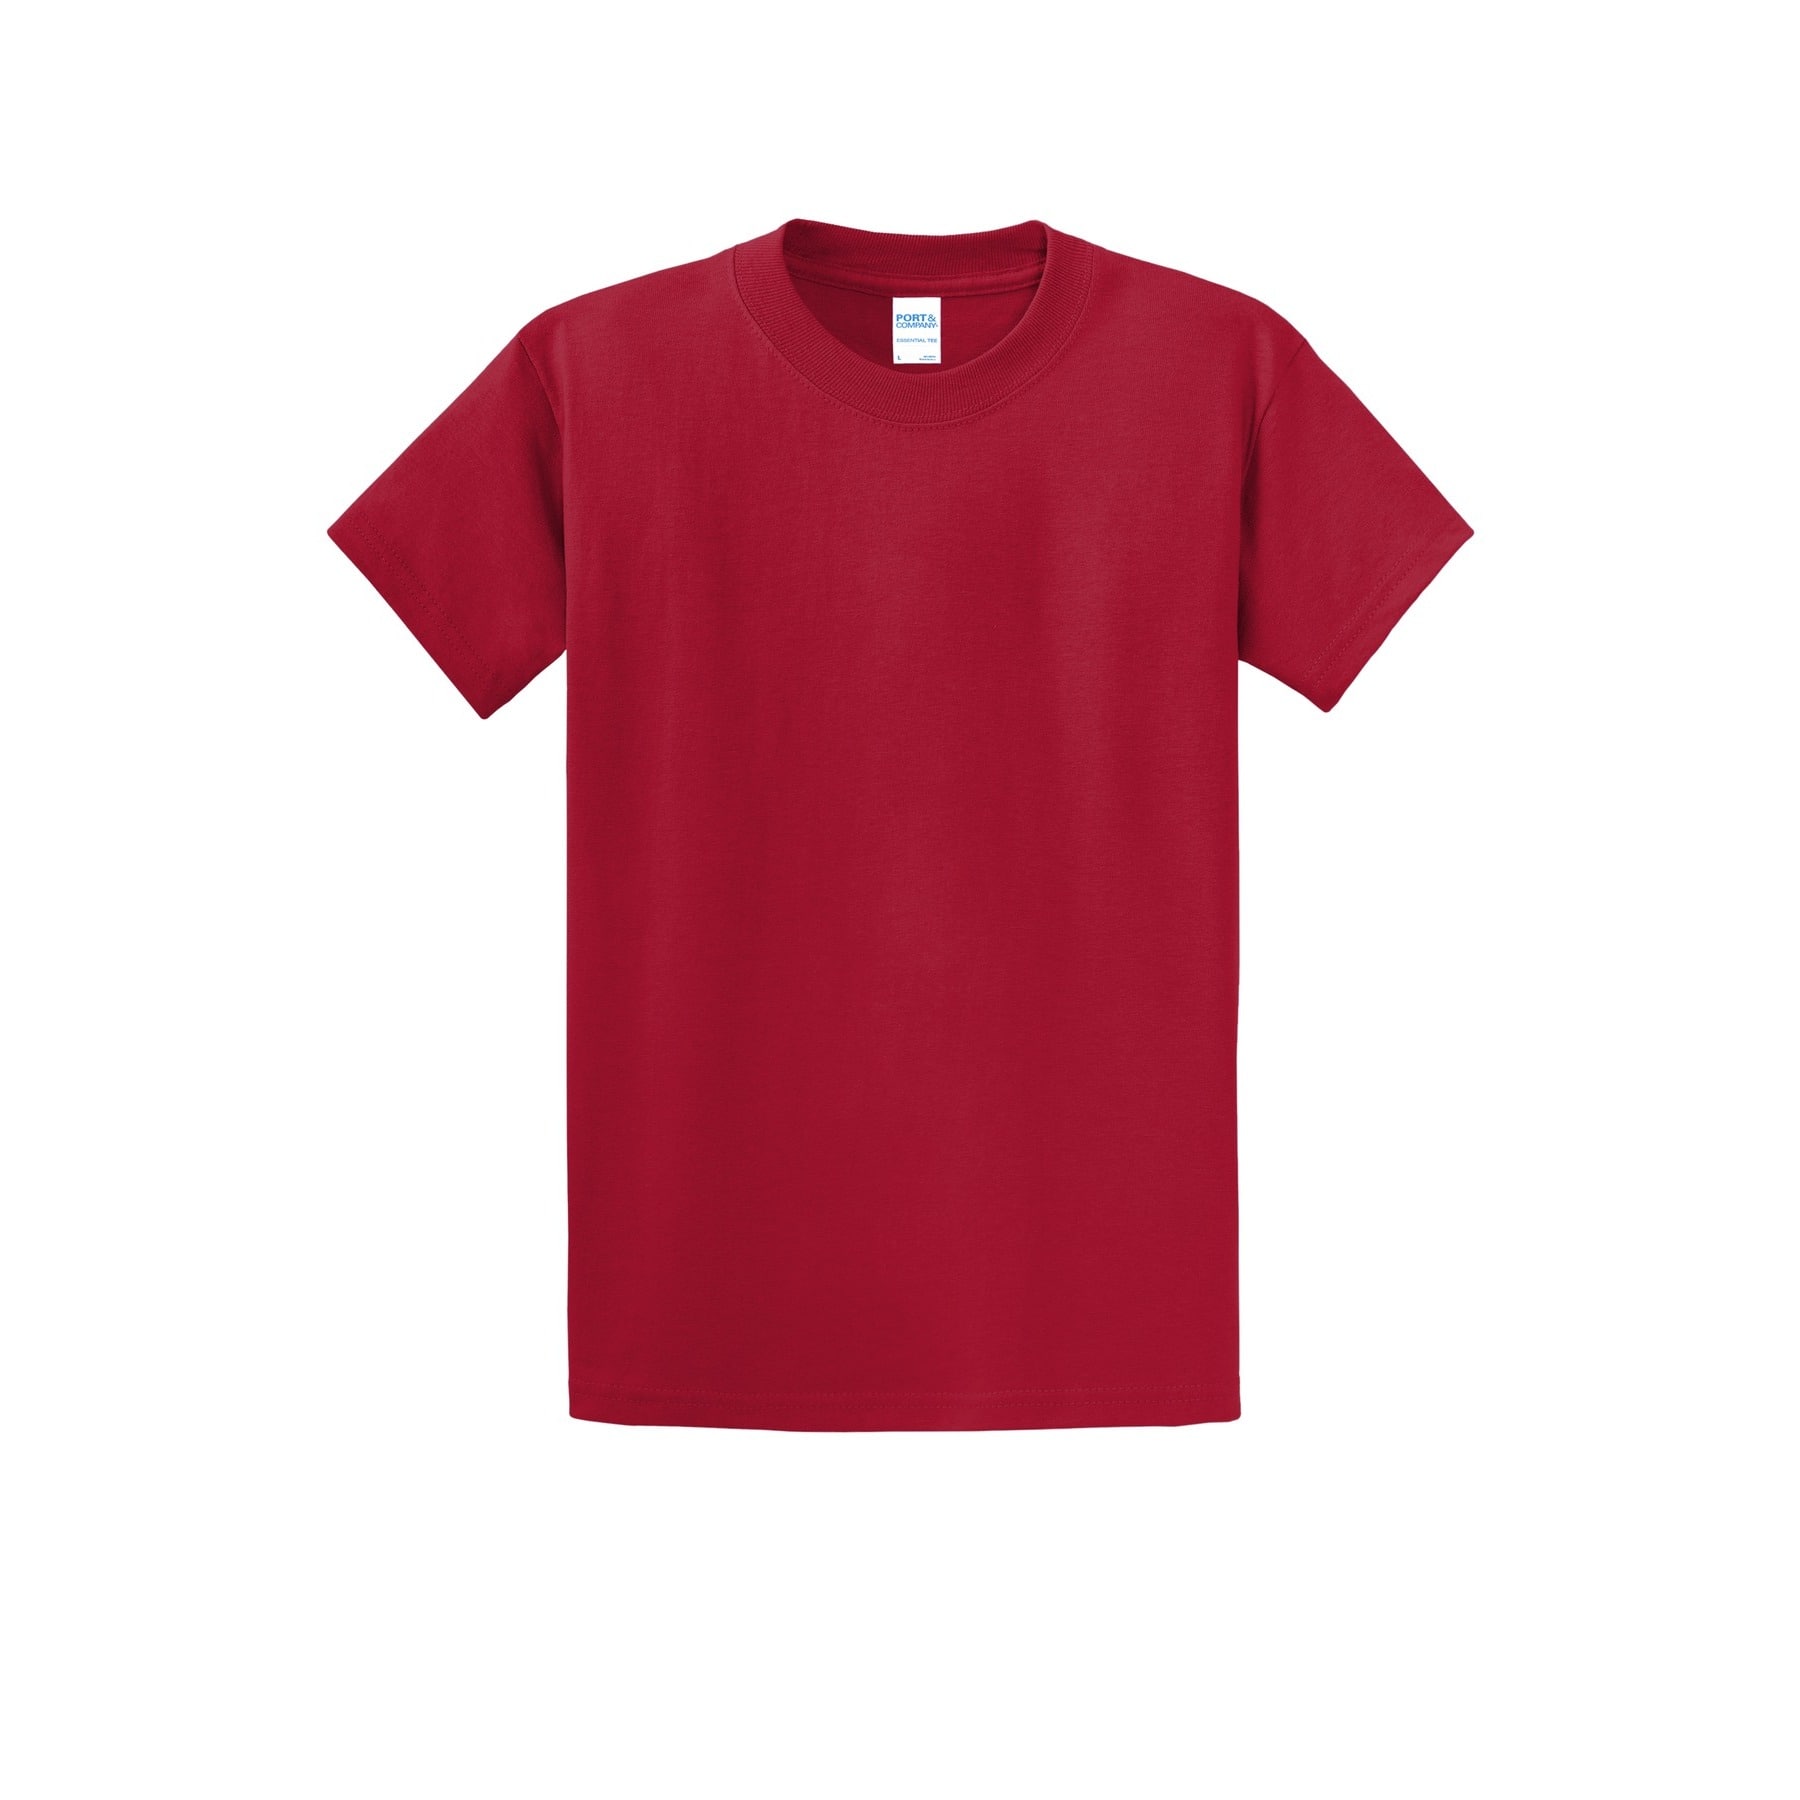 & | Pink Port Michaels & Essential Red Adult Shades Company® T-Shirt